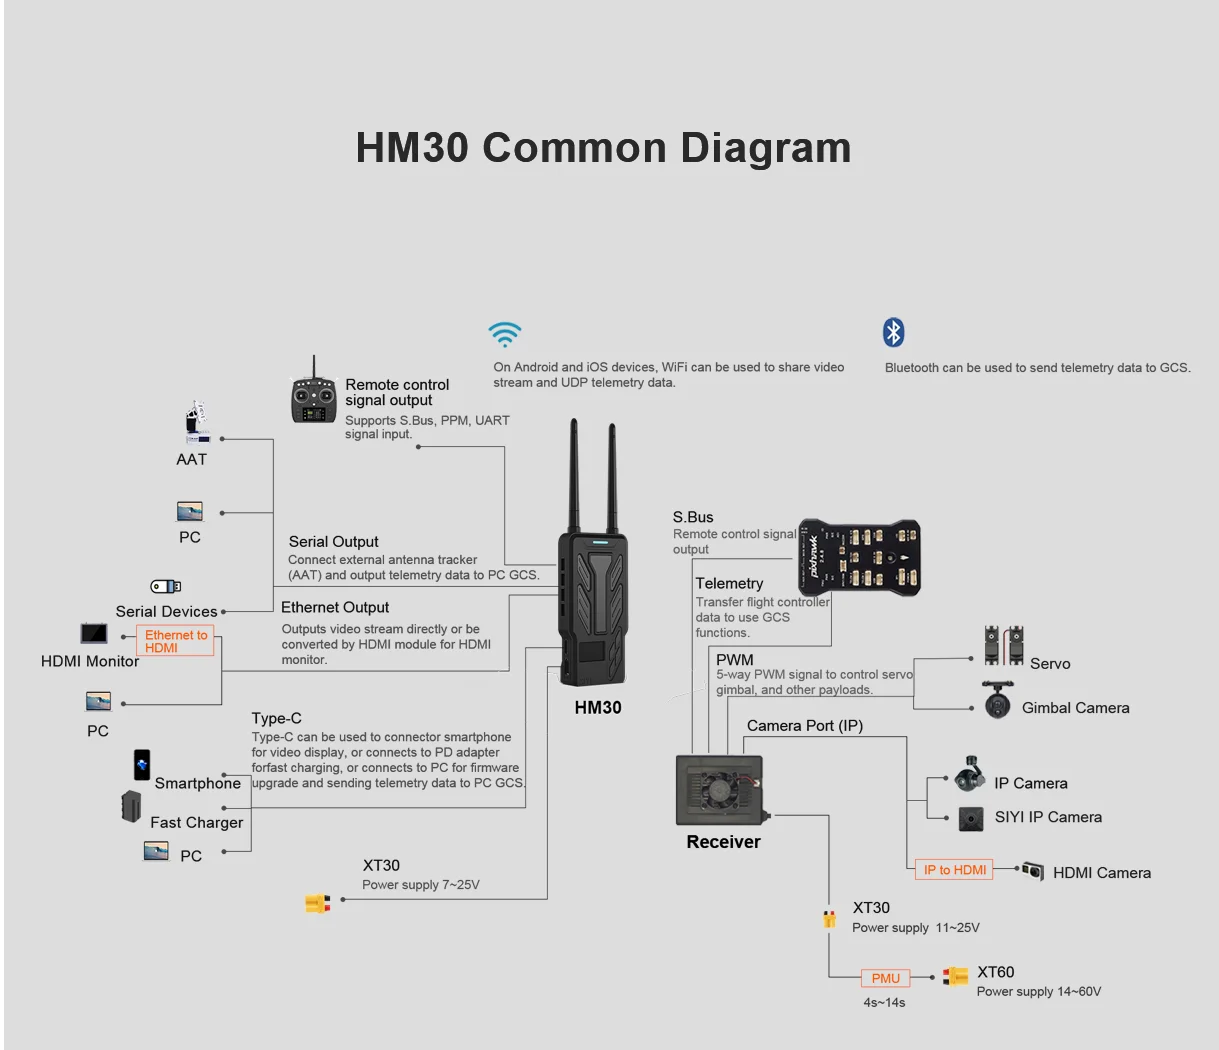 SIYI HM30 Full HD Digital Video Link, HM3O Common Diagram On Android and iOS devices WiFi can be used t0 share